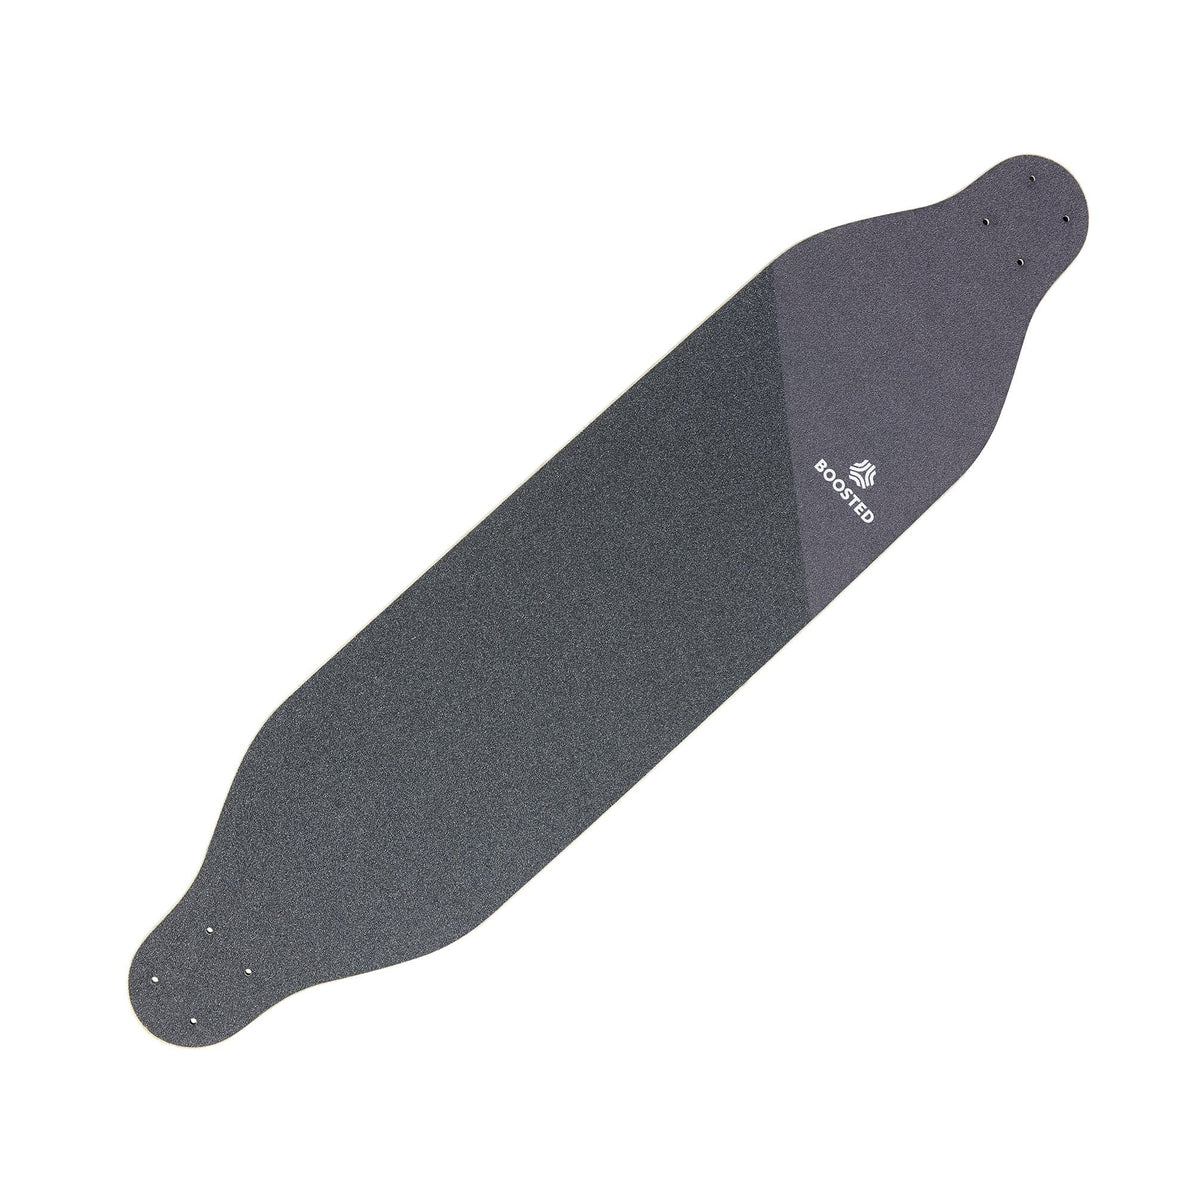 Boosted V2, Plus, Dual and Stealth Grip Tape